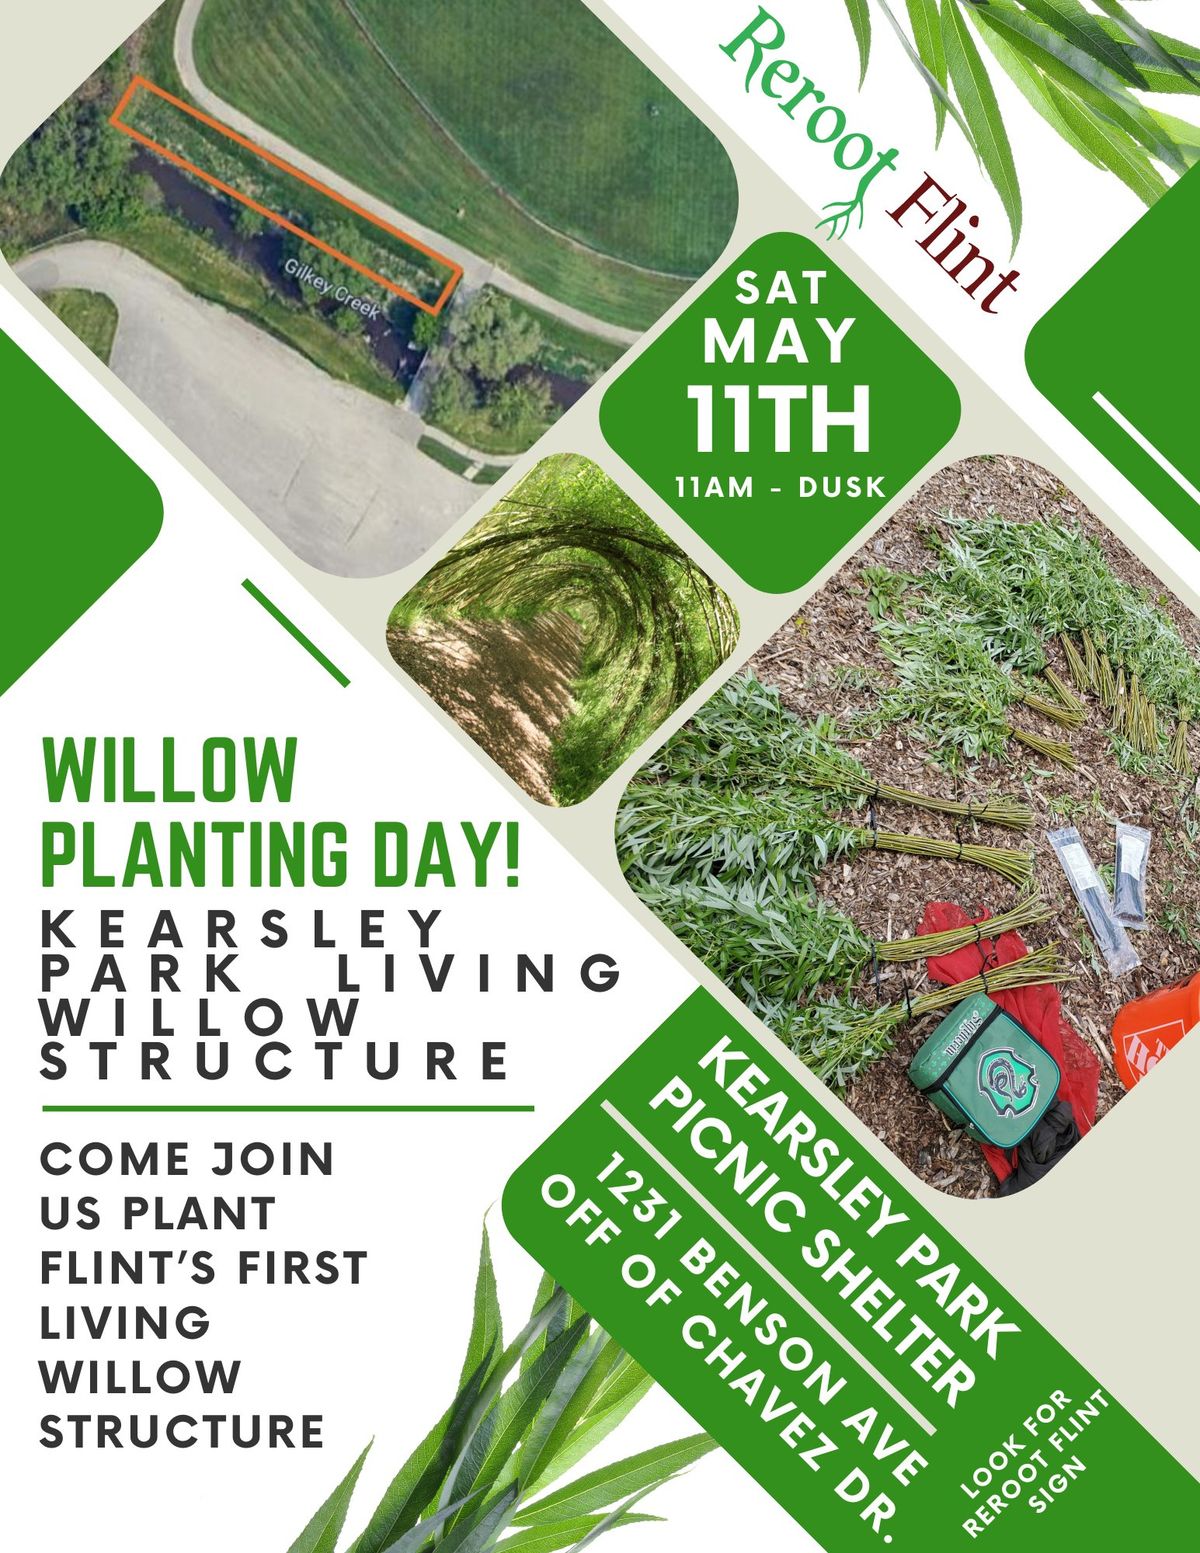 Willow Planting Day!